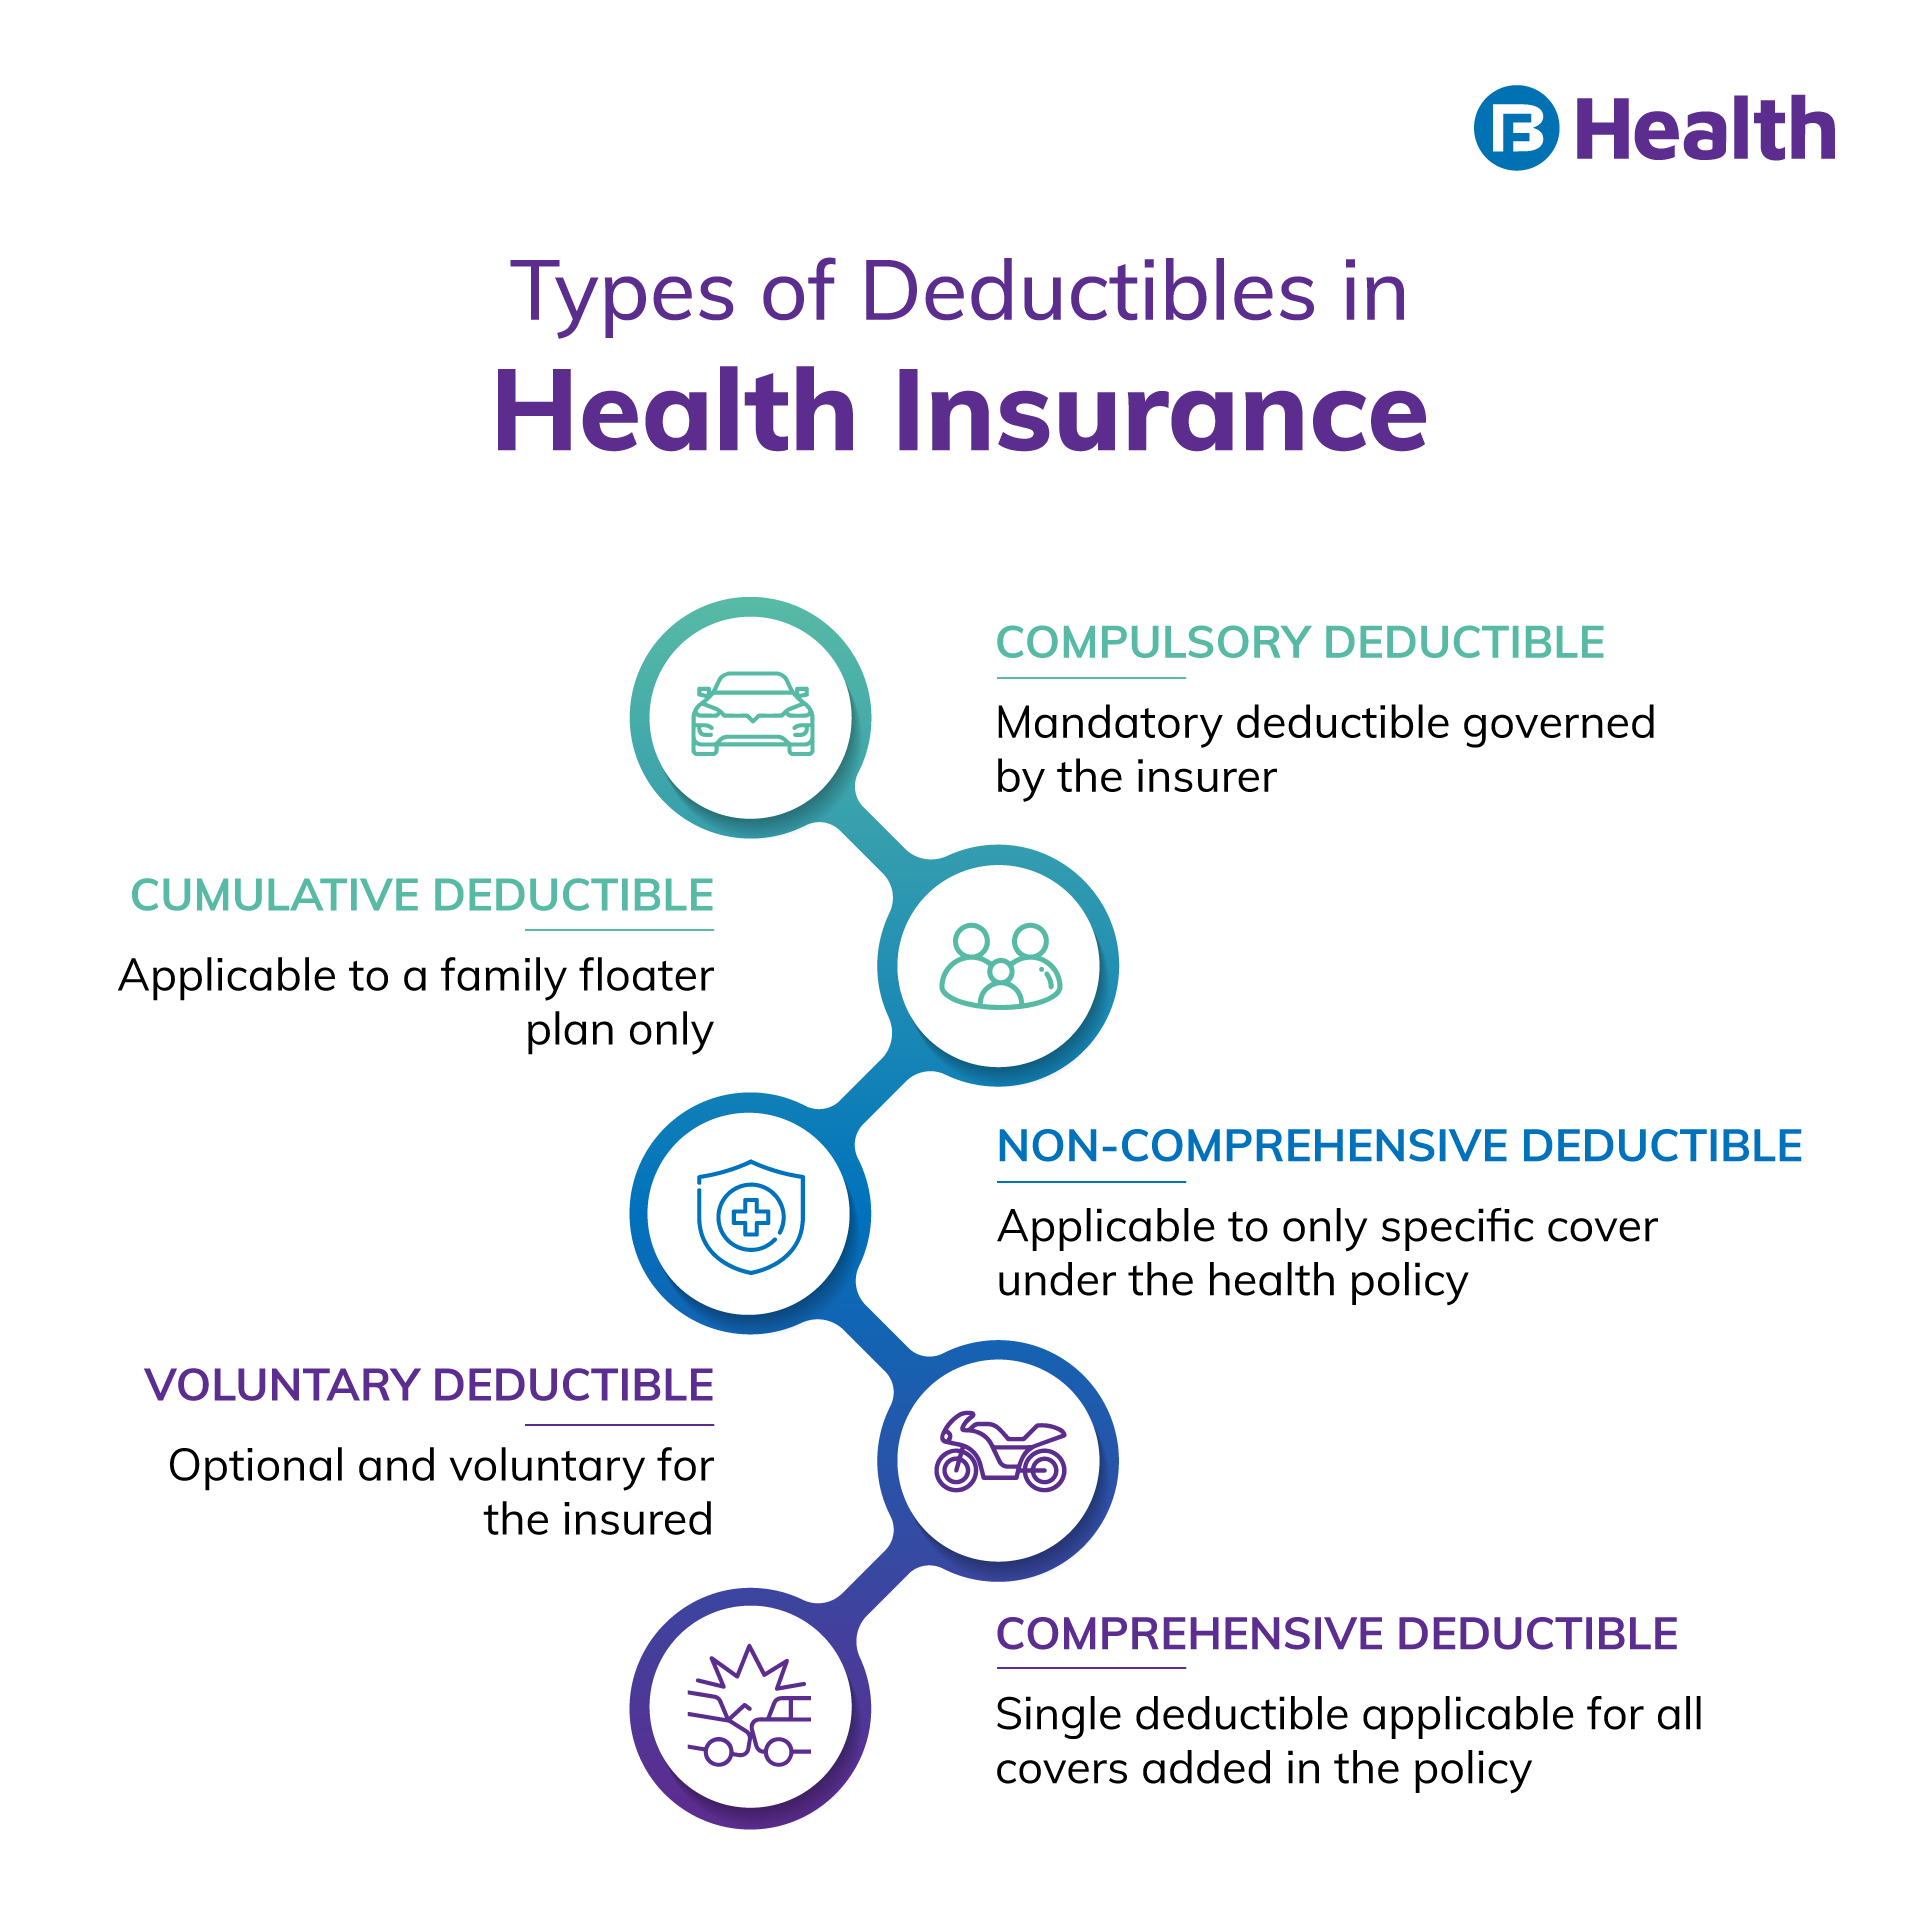 How to choose low or high deductible health insurance?